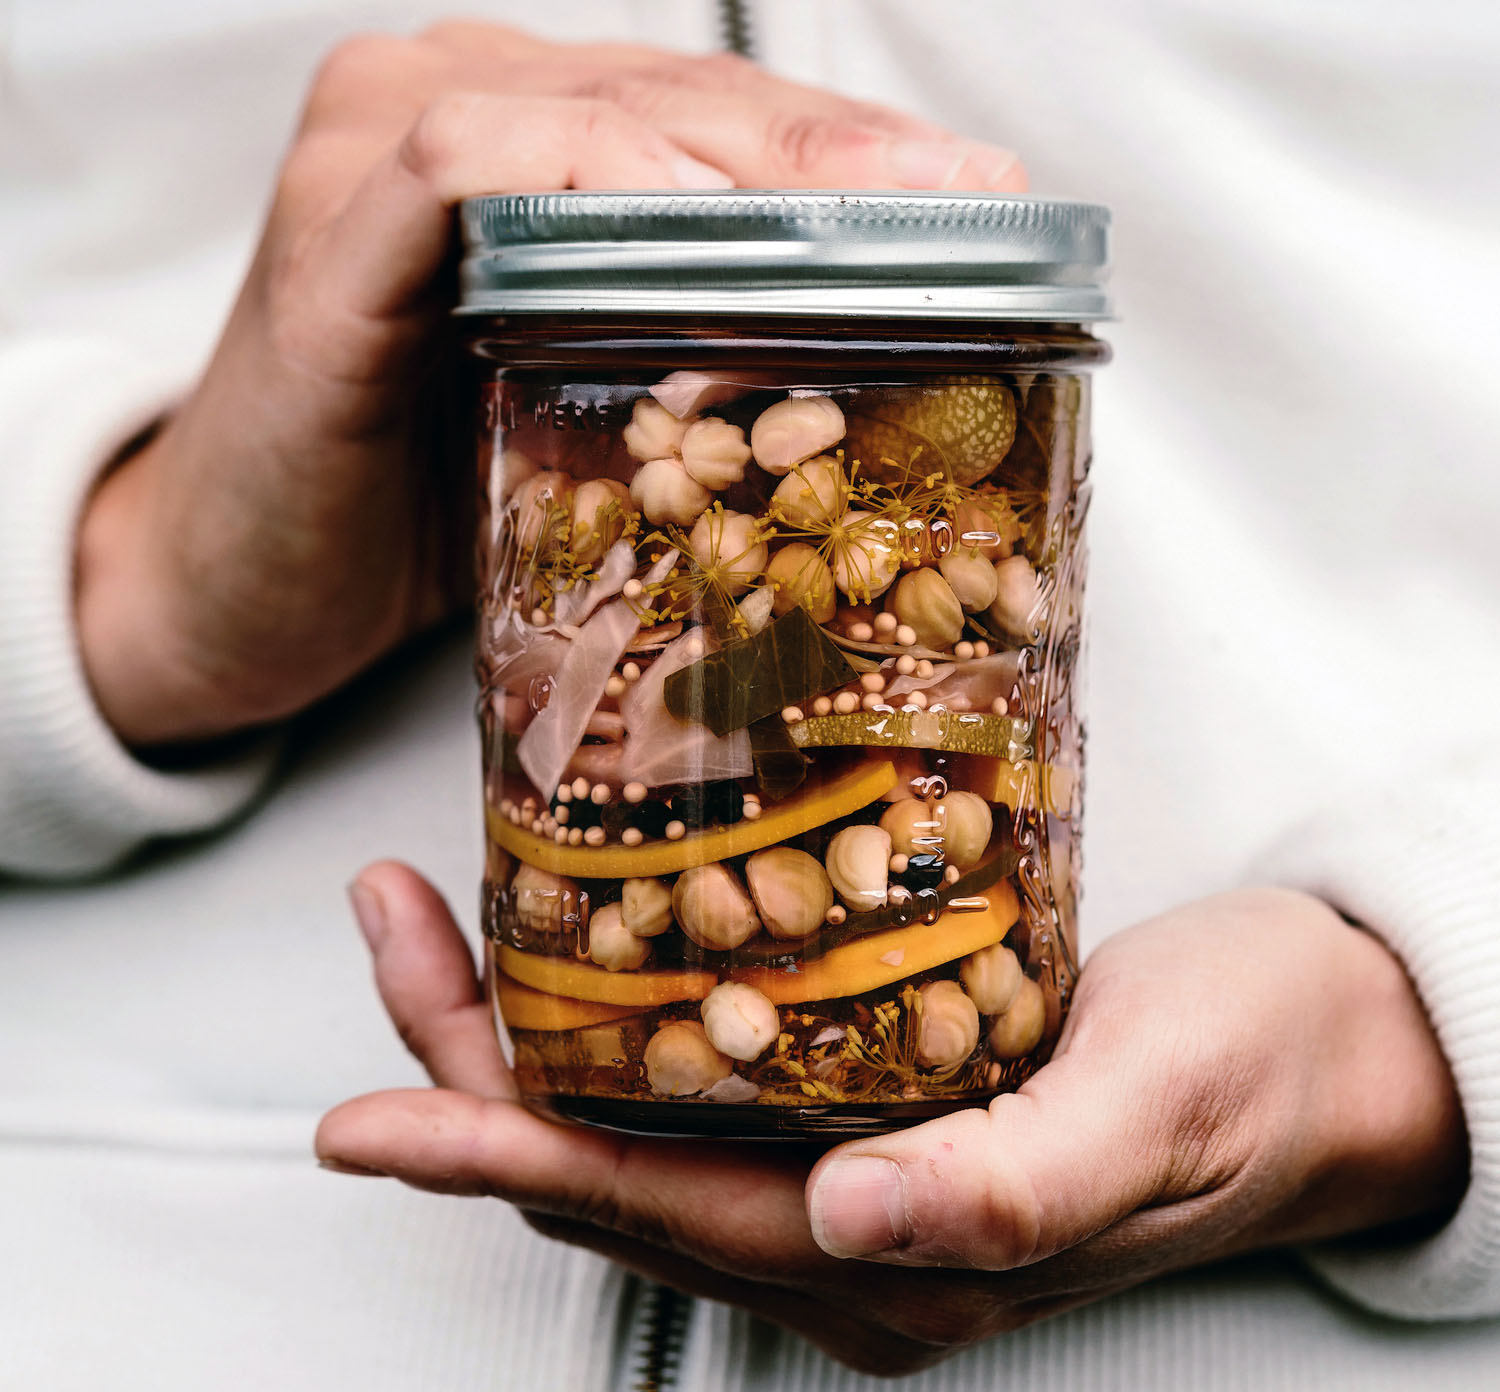 Pickled Nasturtium Seeds Recipe By Becca Miller Edible Capital District,How To Cook Chicken Of The Woods